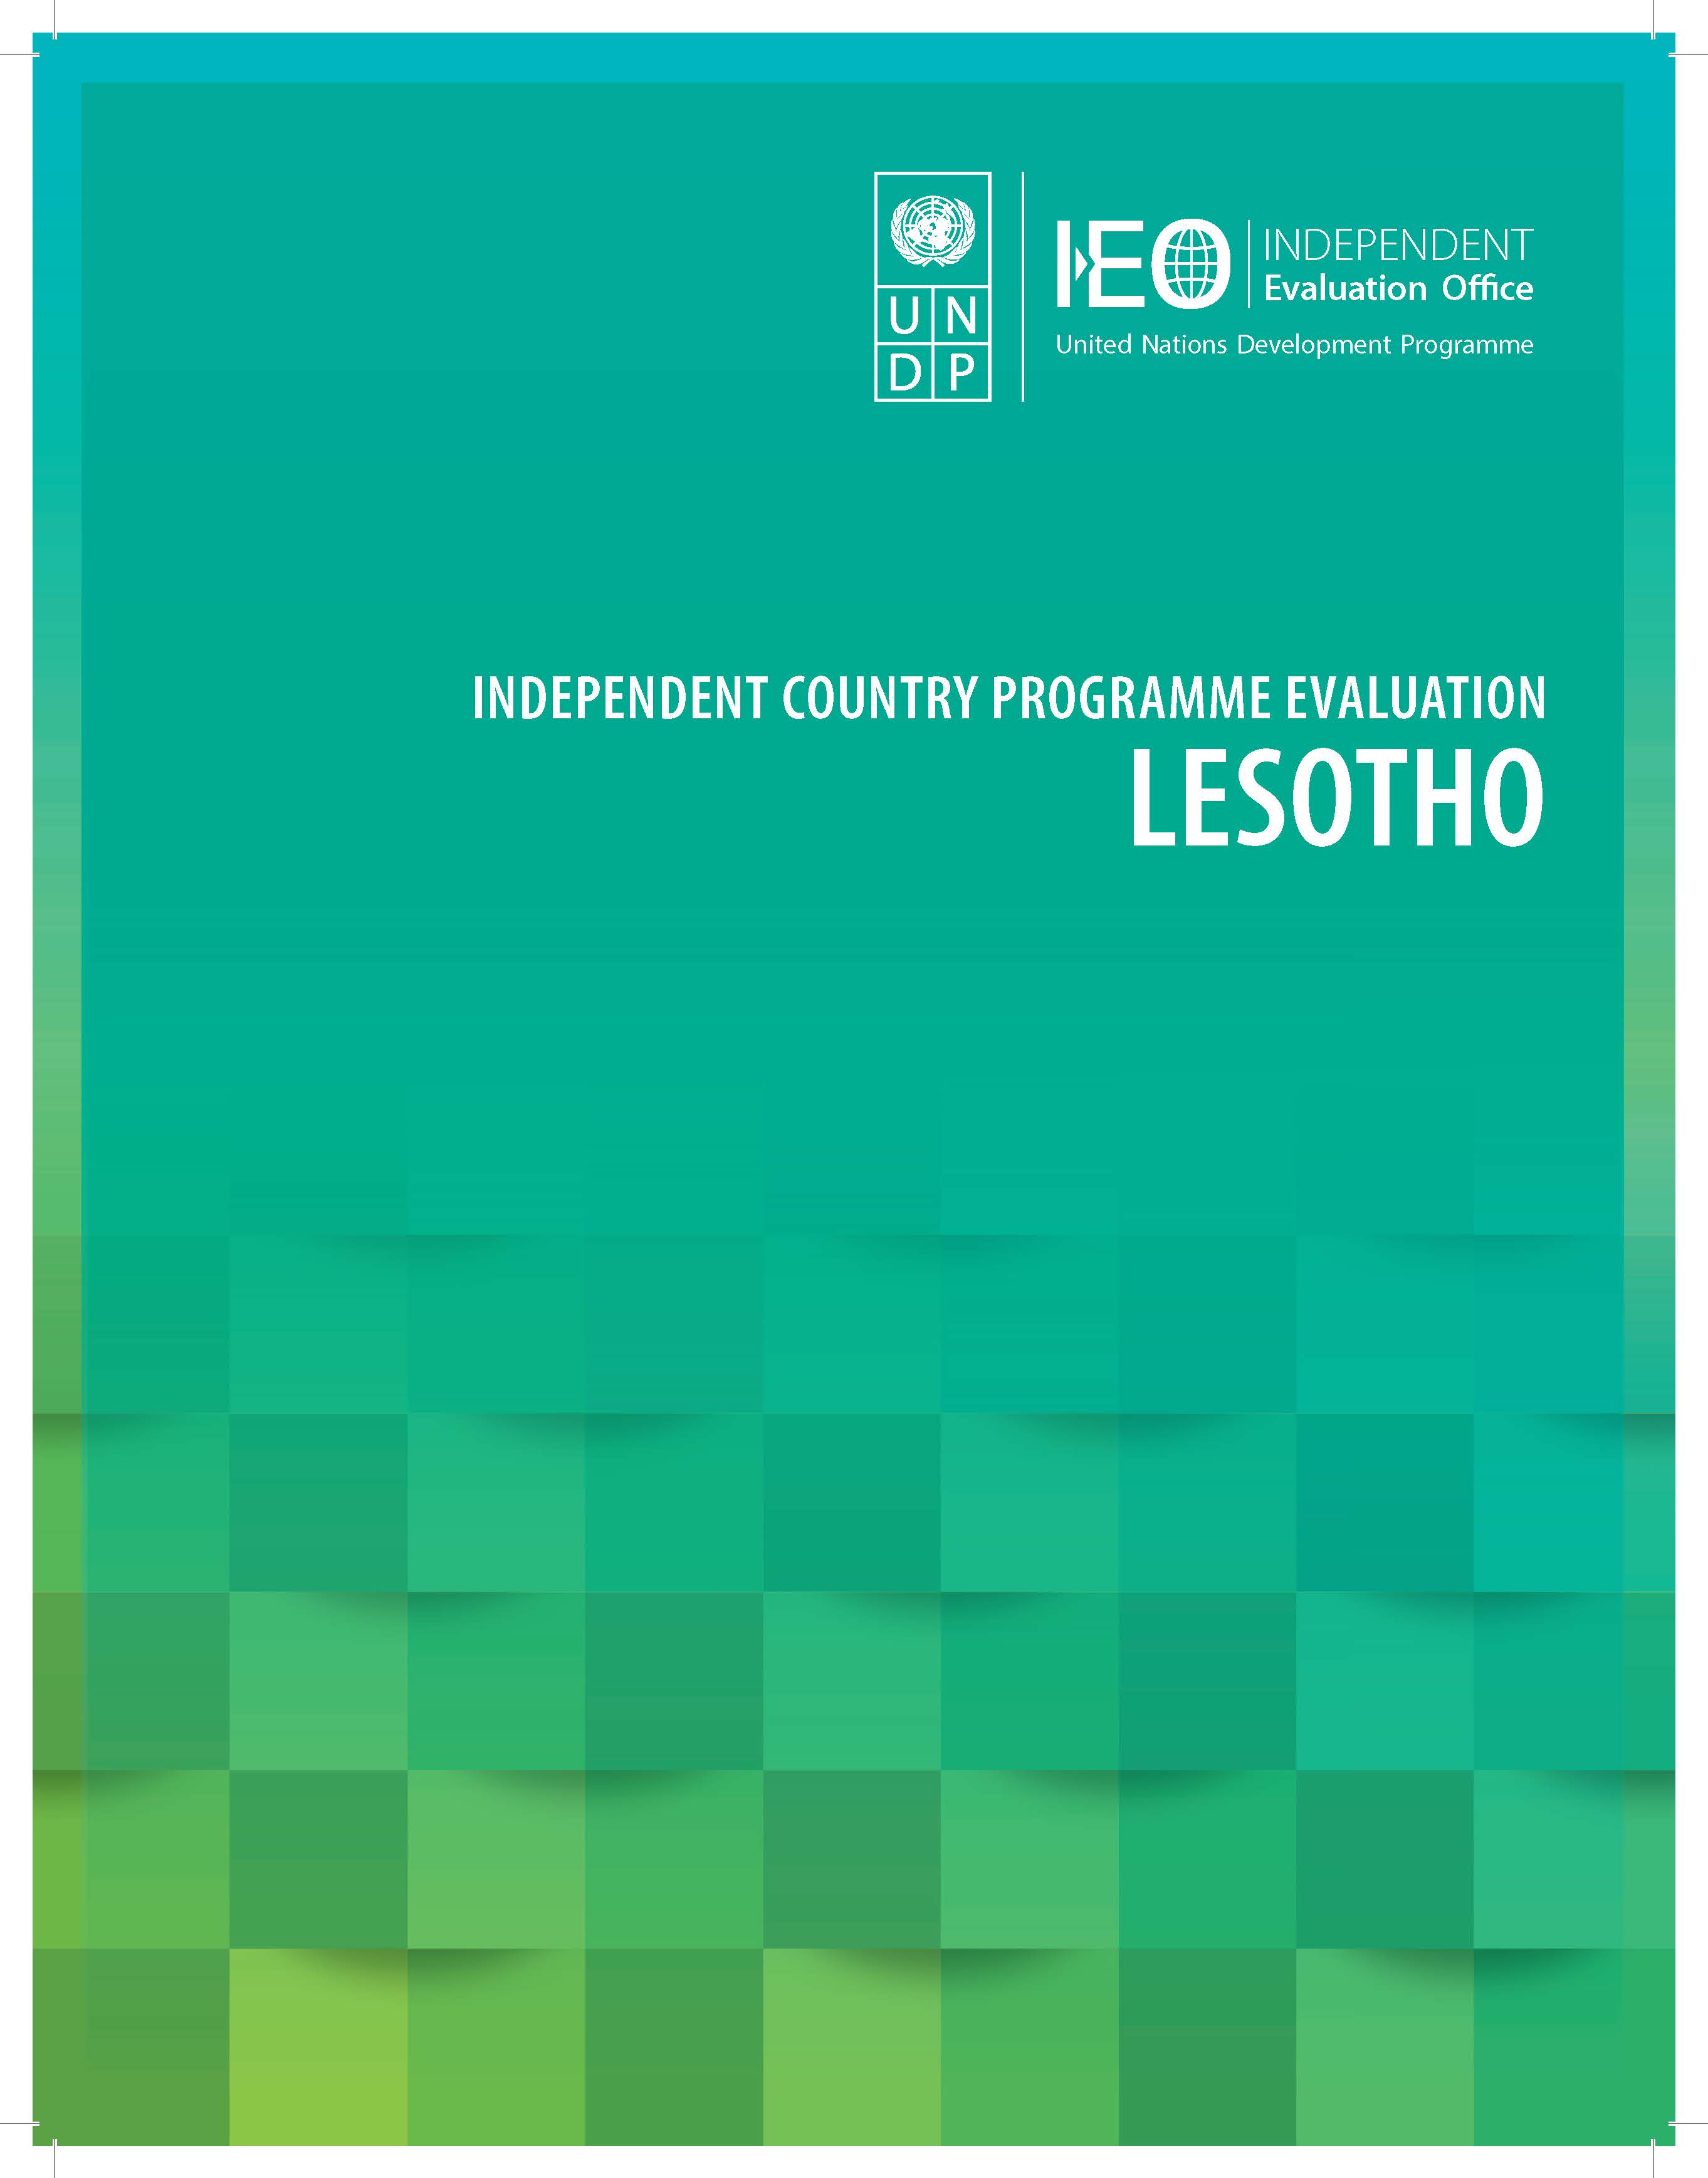 Independent Country Programme Evaluation: Lesotho